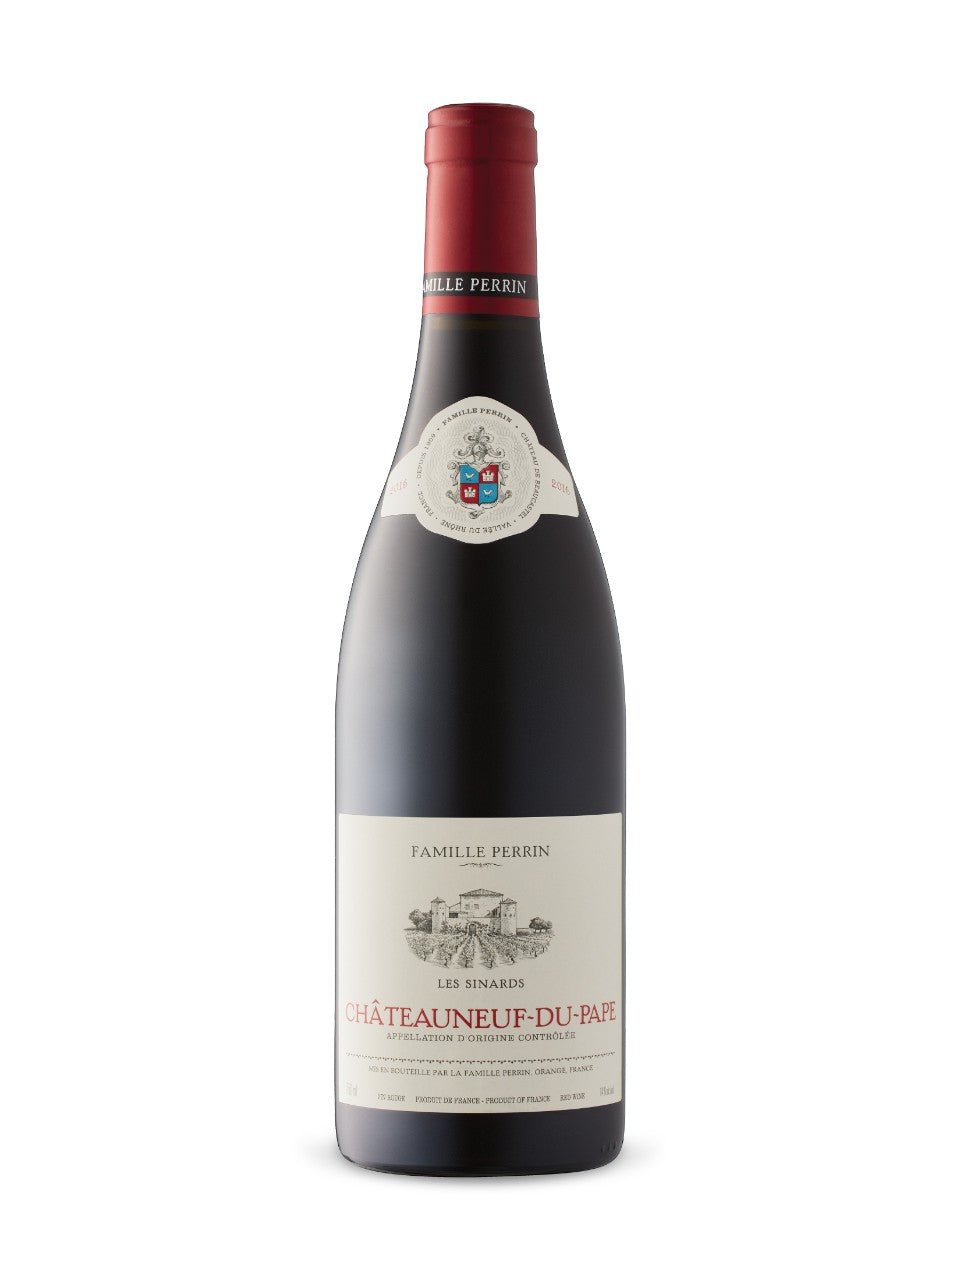 Famille Perrin Les Sinards Châteauneuf-du-Pape | Exquisite Wine & Alcohol Gift Delivery Toronto Canada | Vyno